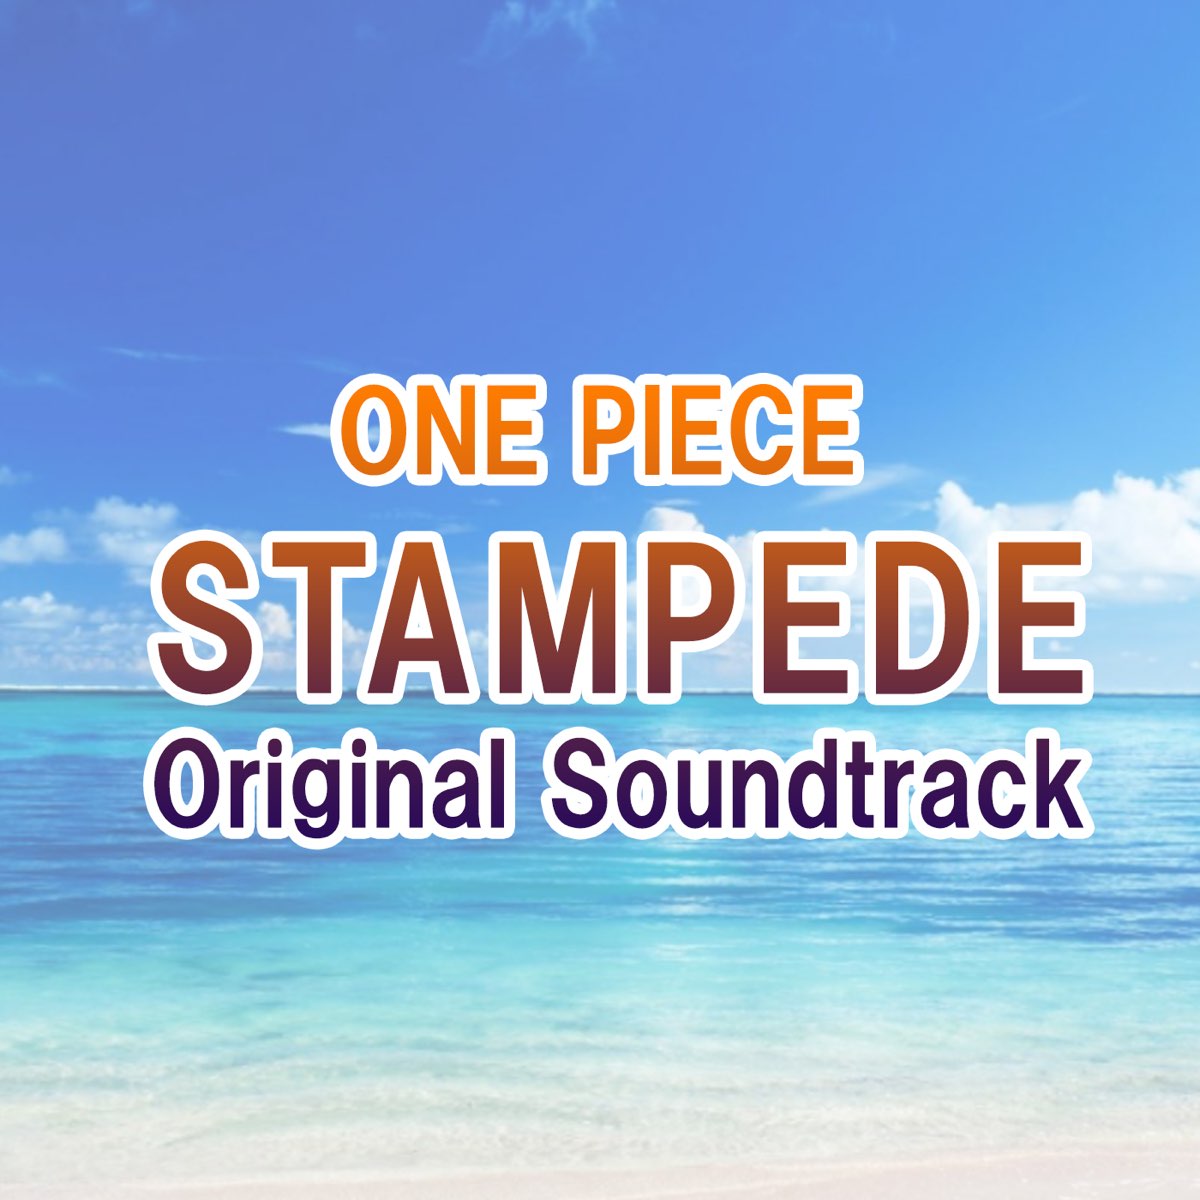 One Piece Stampede Originalsoundtrack By Various Artists On Itunes